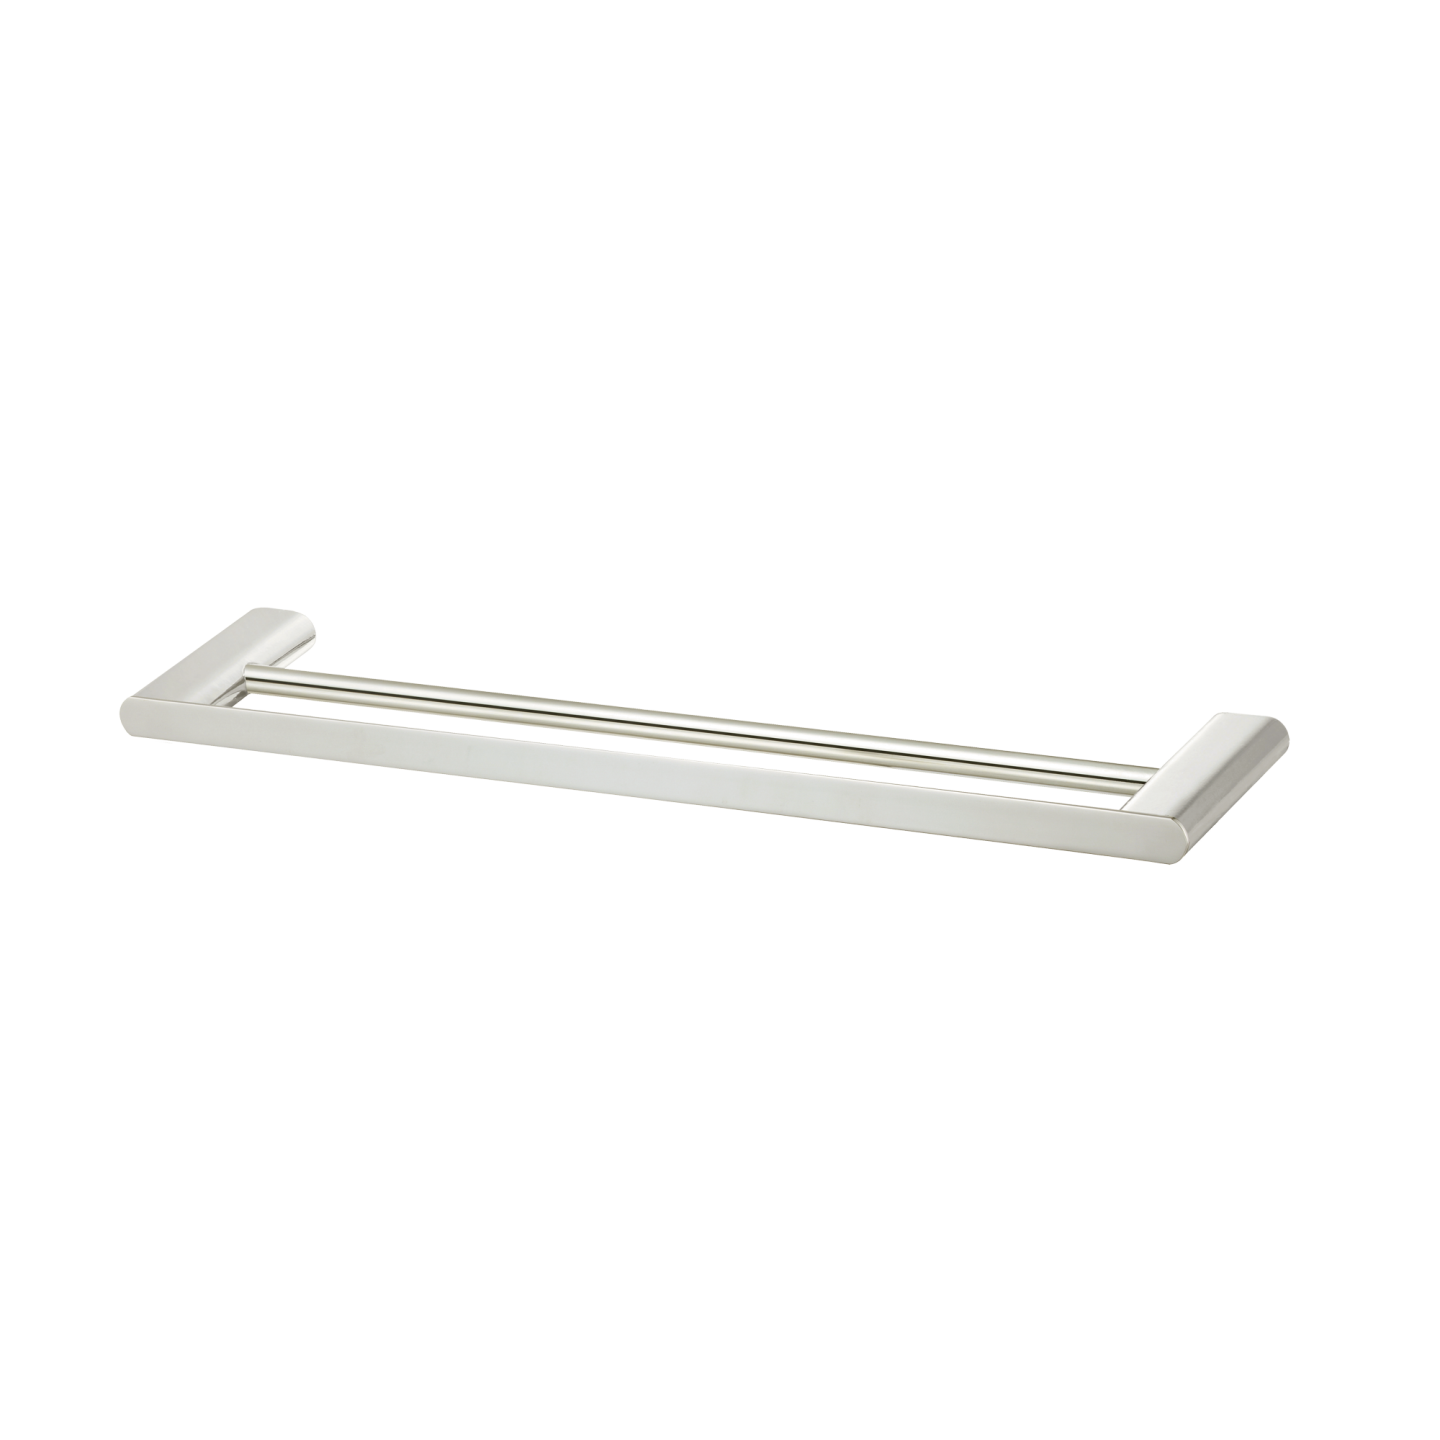 OLIVERI MADRID DOUBLE NON HEATED TOWEL RAIL BRUSHED NICKEL (AVAILABLE IN 650MM AND 800MM)